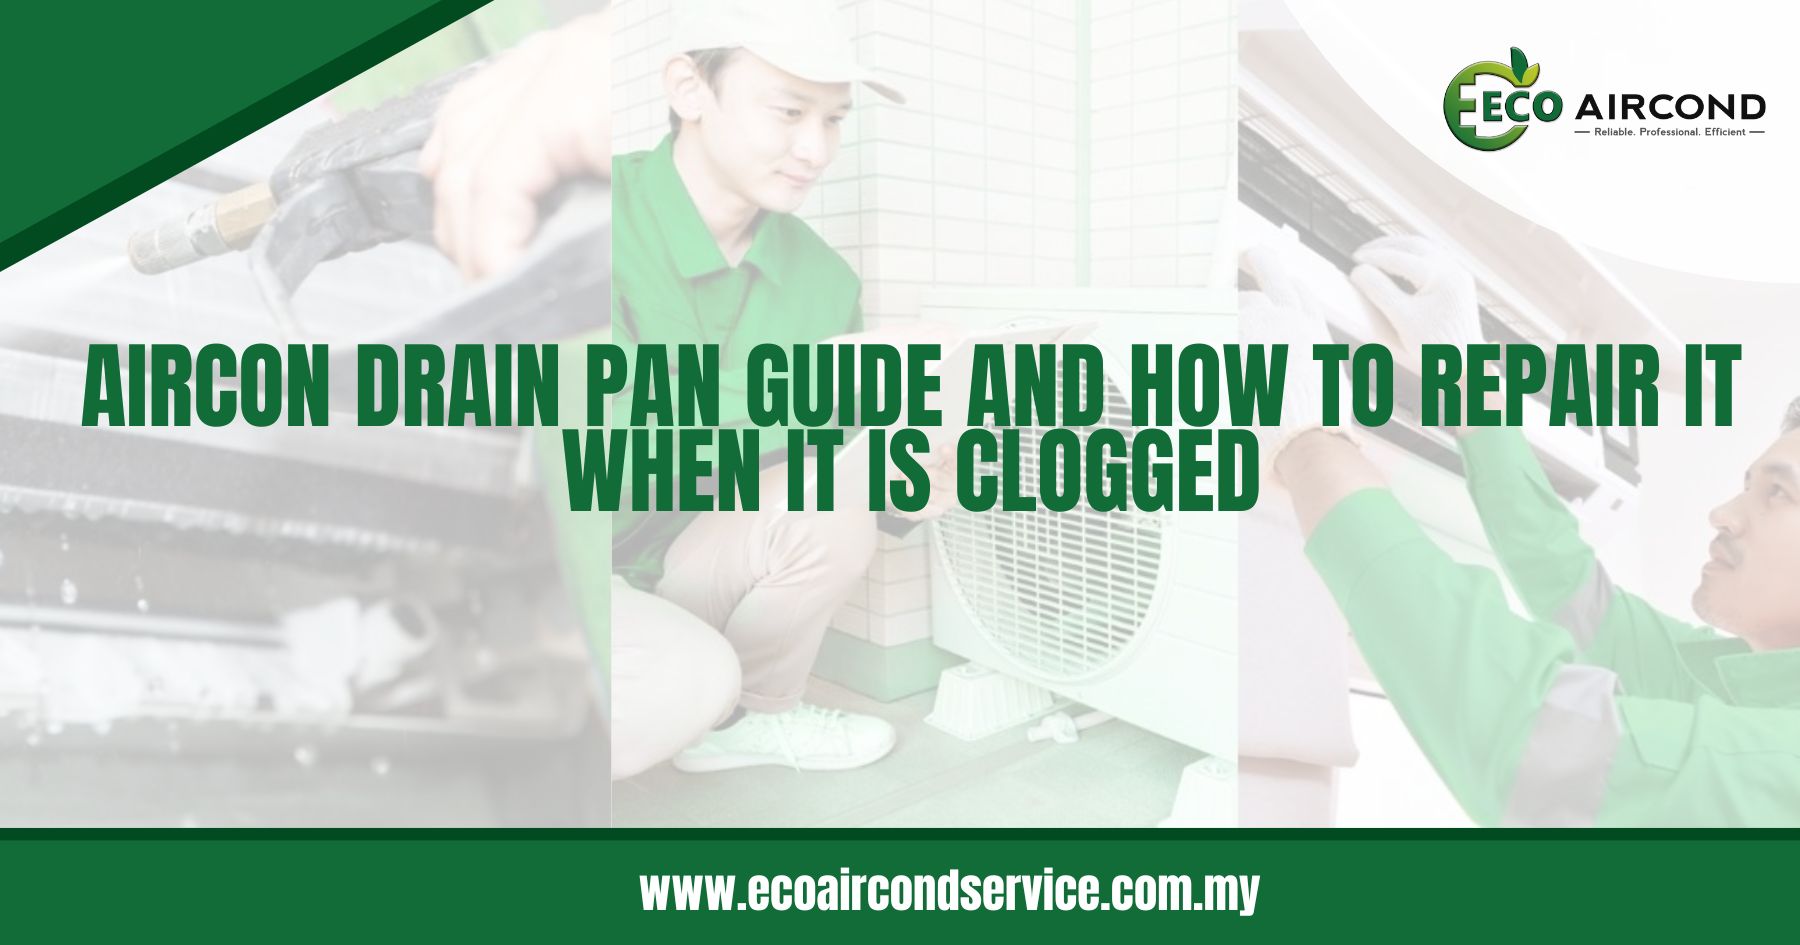 Aircon Drain Pan Guide And How To Repair It When It Is Clogged